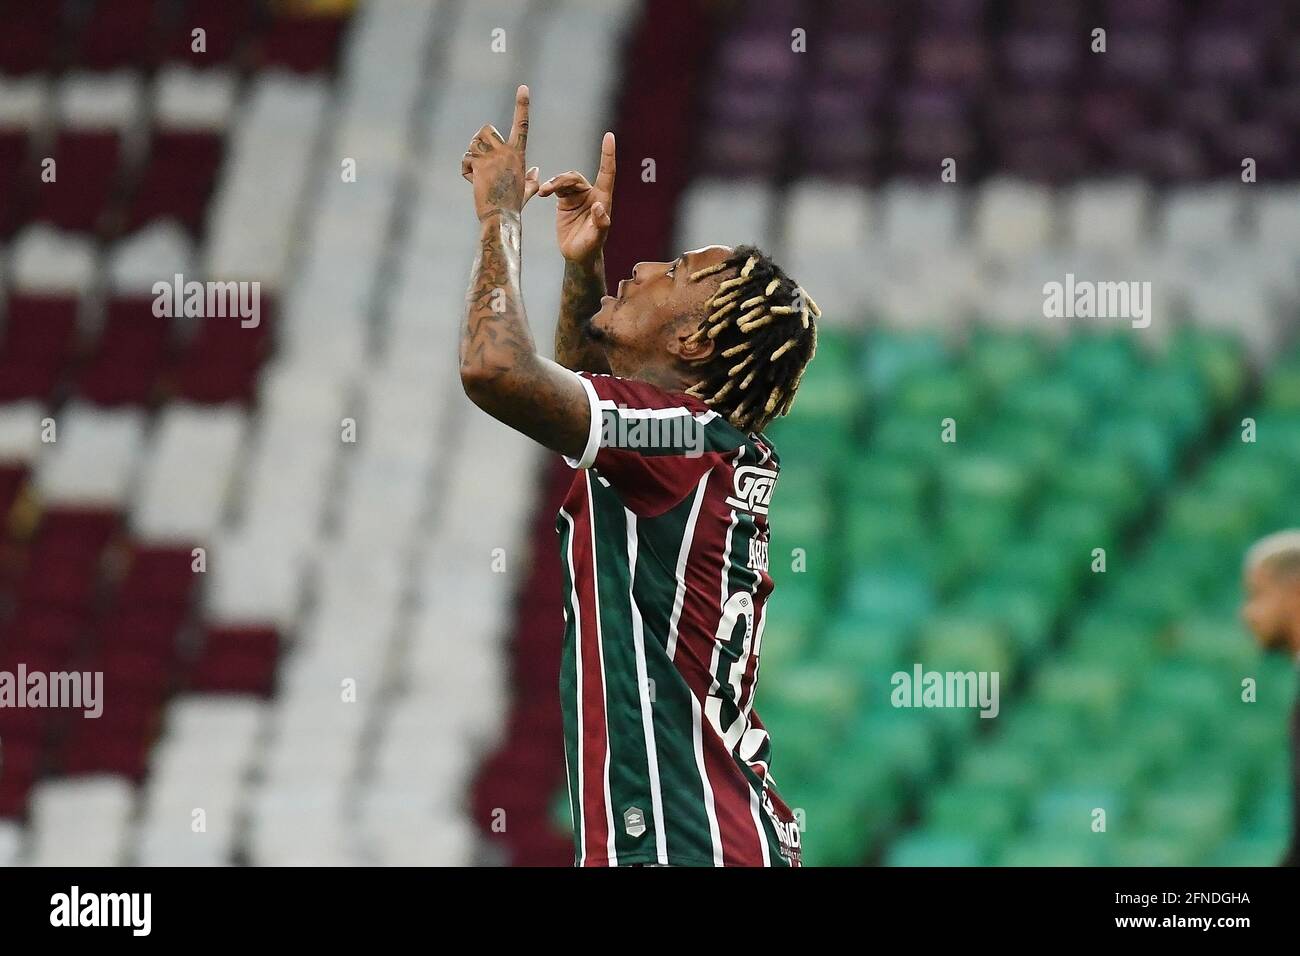 Rio de Janeiro, Brazil, May 15, 2021. Soccer player Abel Hernandez of the team Fluminense celebrates his goal during a match against Flamengo for the Stock Photo